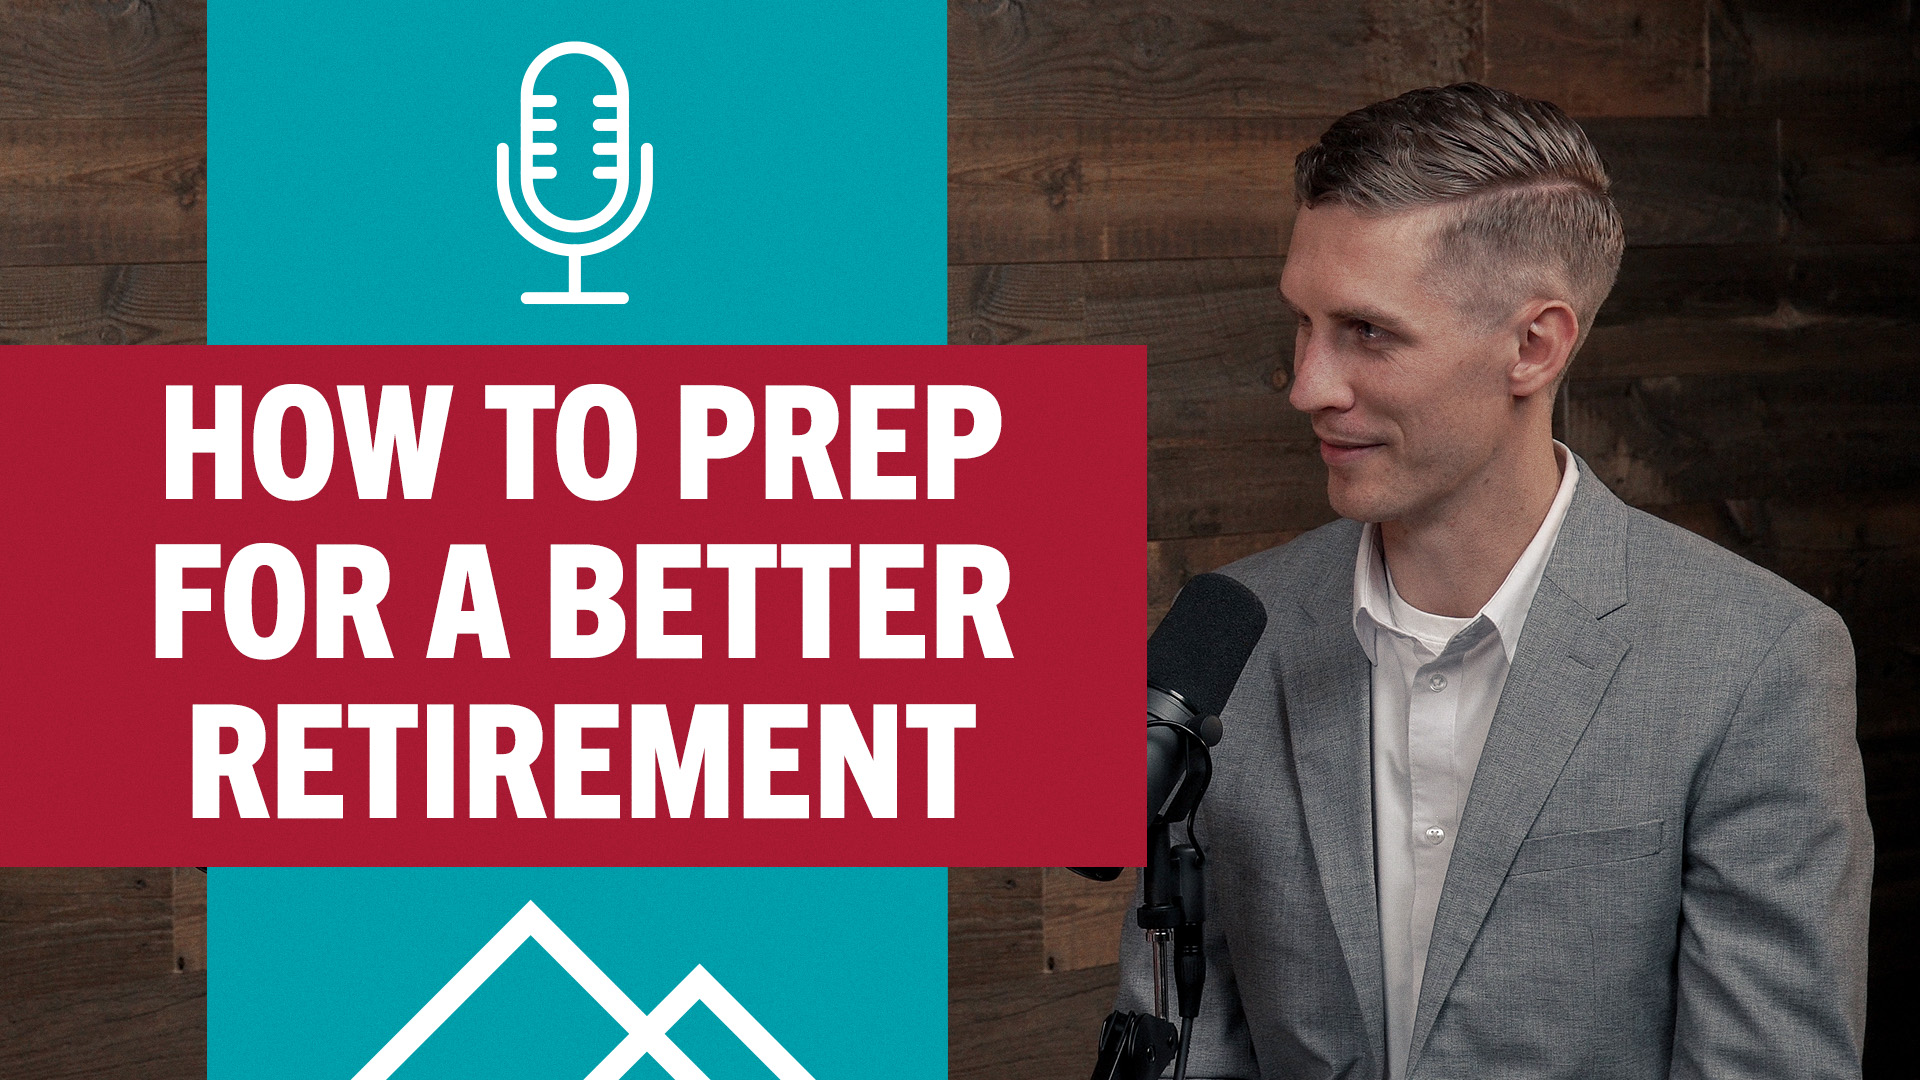 man in suit at the podcast mike. Text on image says "how to prep for a better retirement"